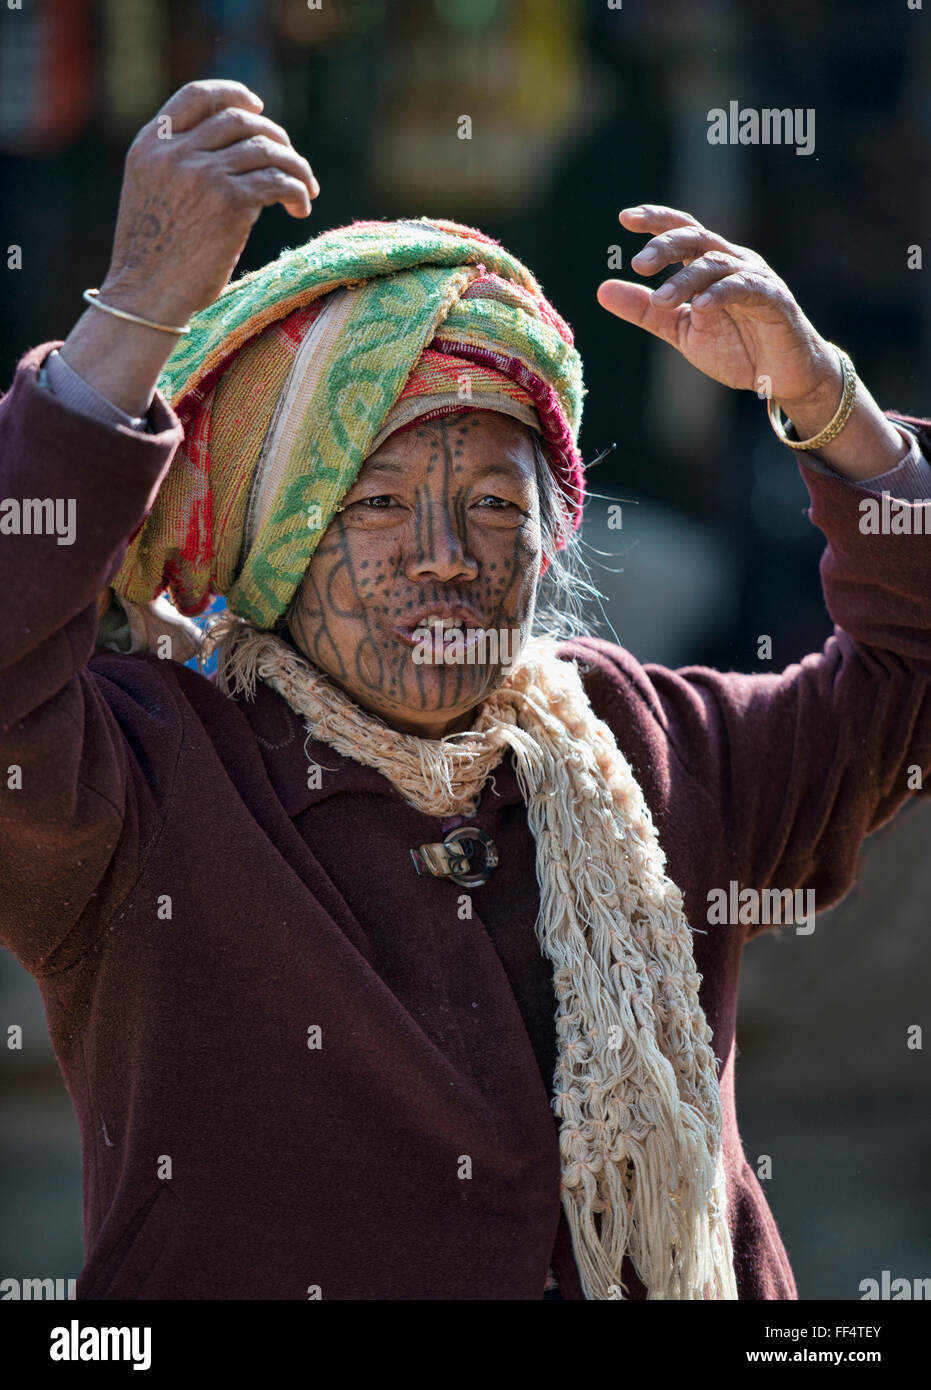 A Muun Chin woman with face tattoos, Mindat, Myanmar. Stock Photo